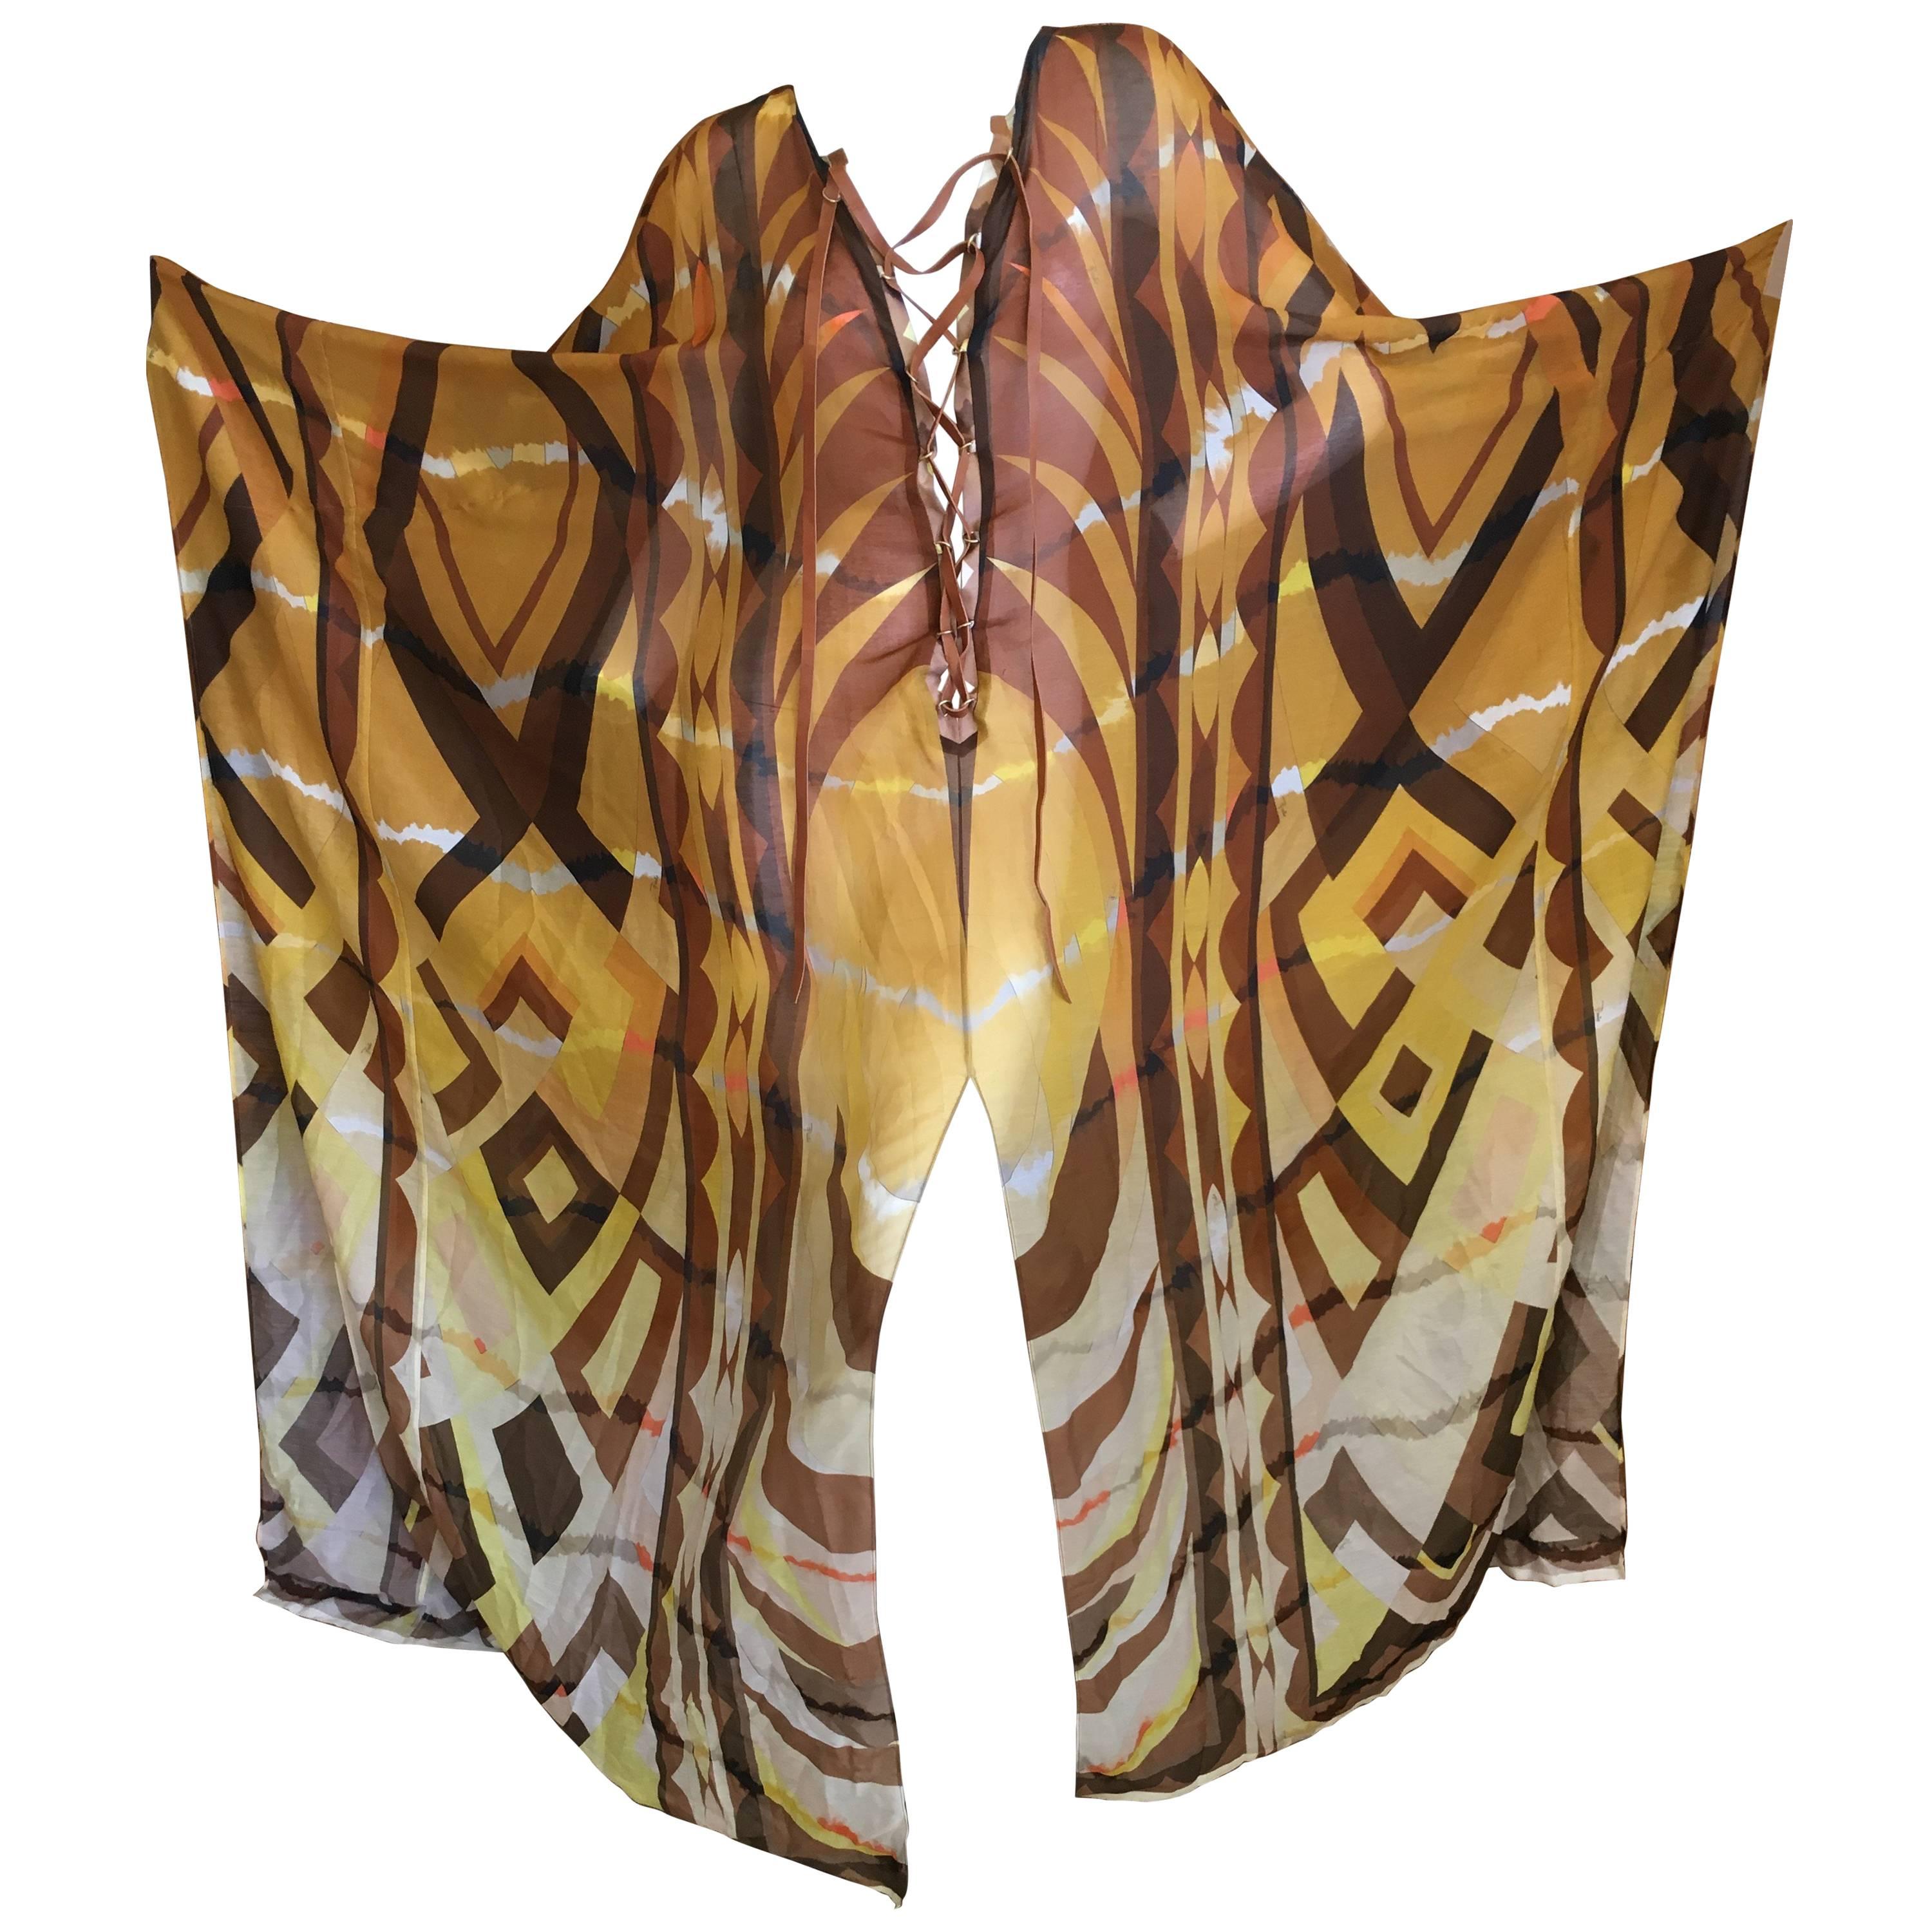 Emilio Pucci Sheer Patterned Caftan with Leather Lace Up Straps New with Tags For Sale